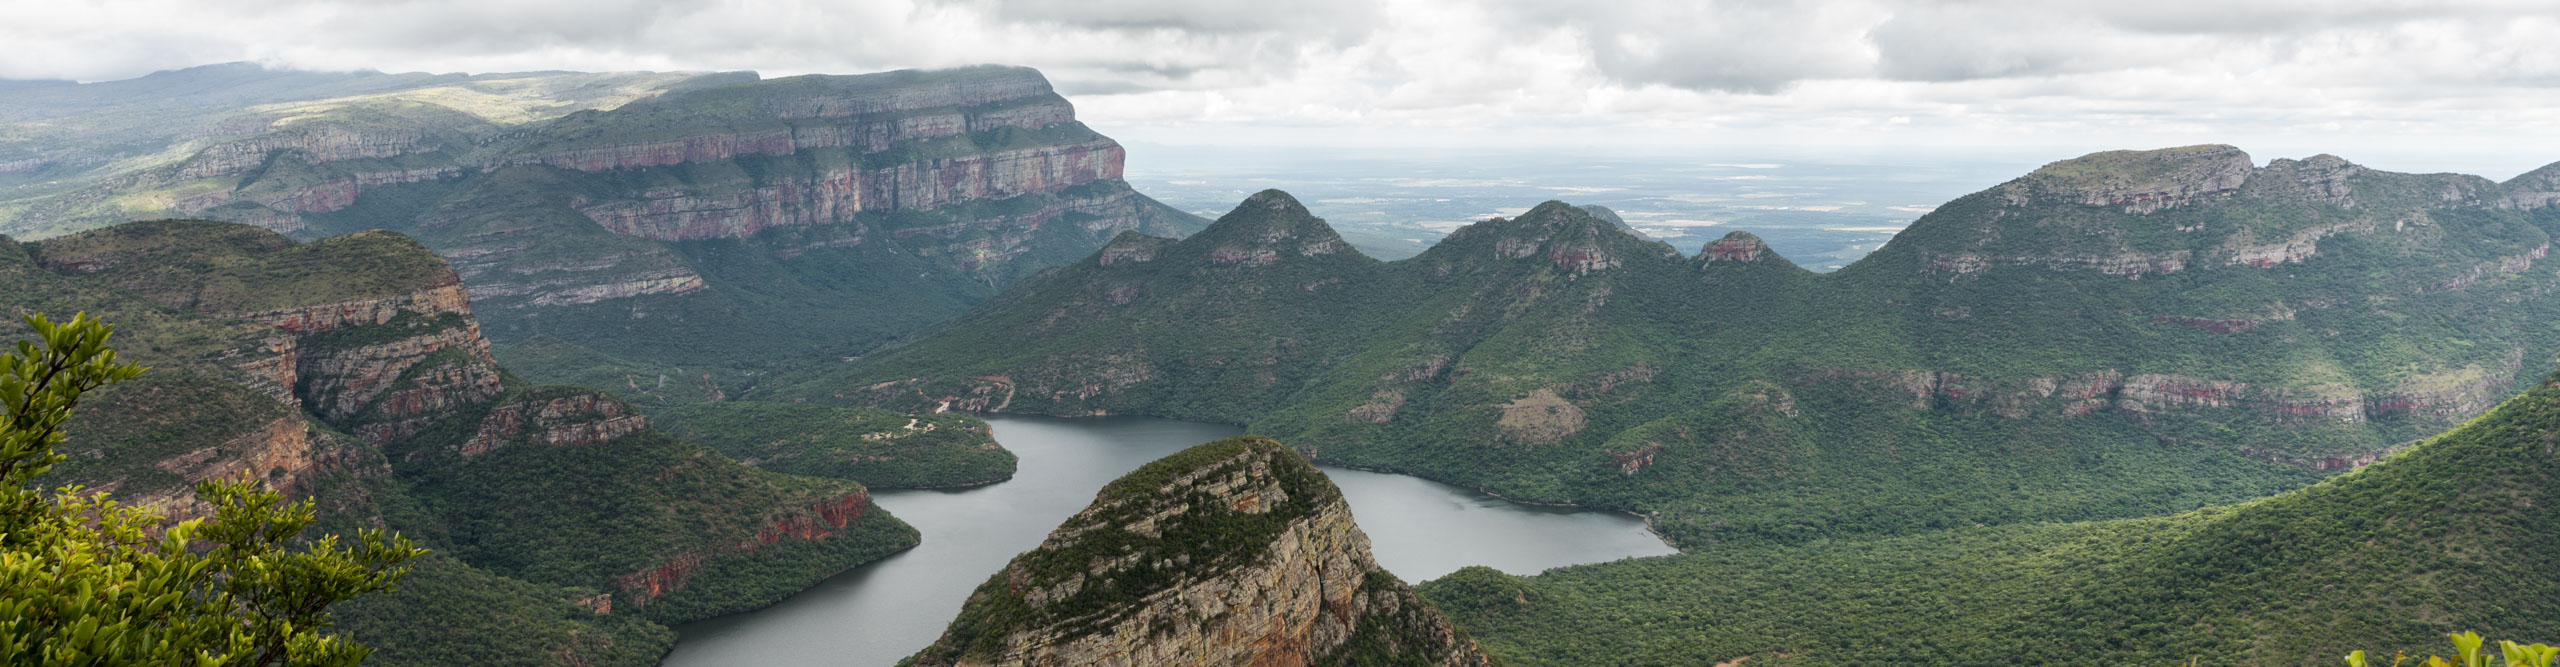 Cloudy weather over mountains and a lake in South Africa